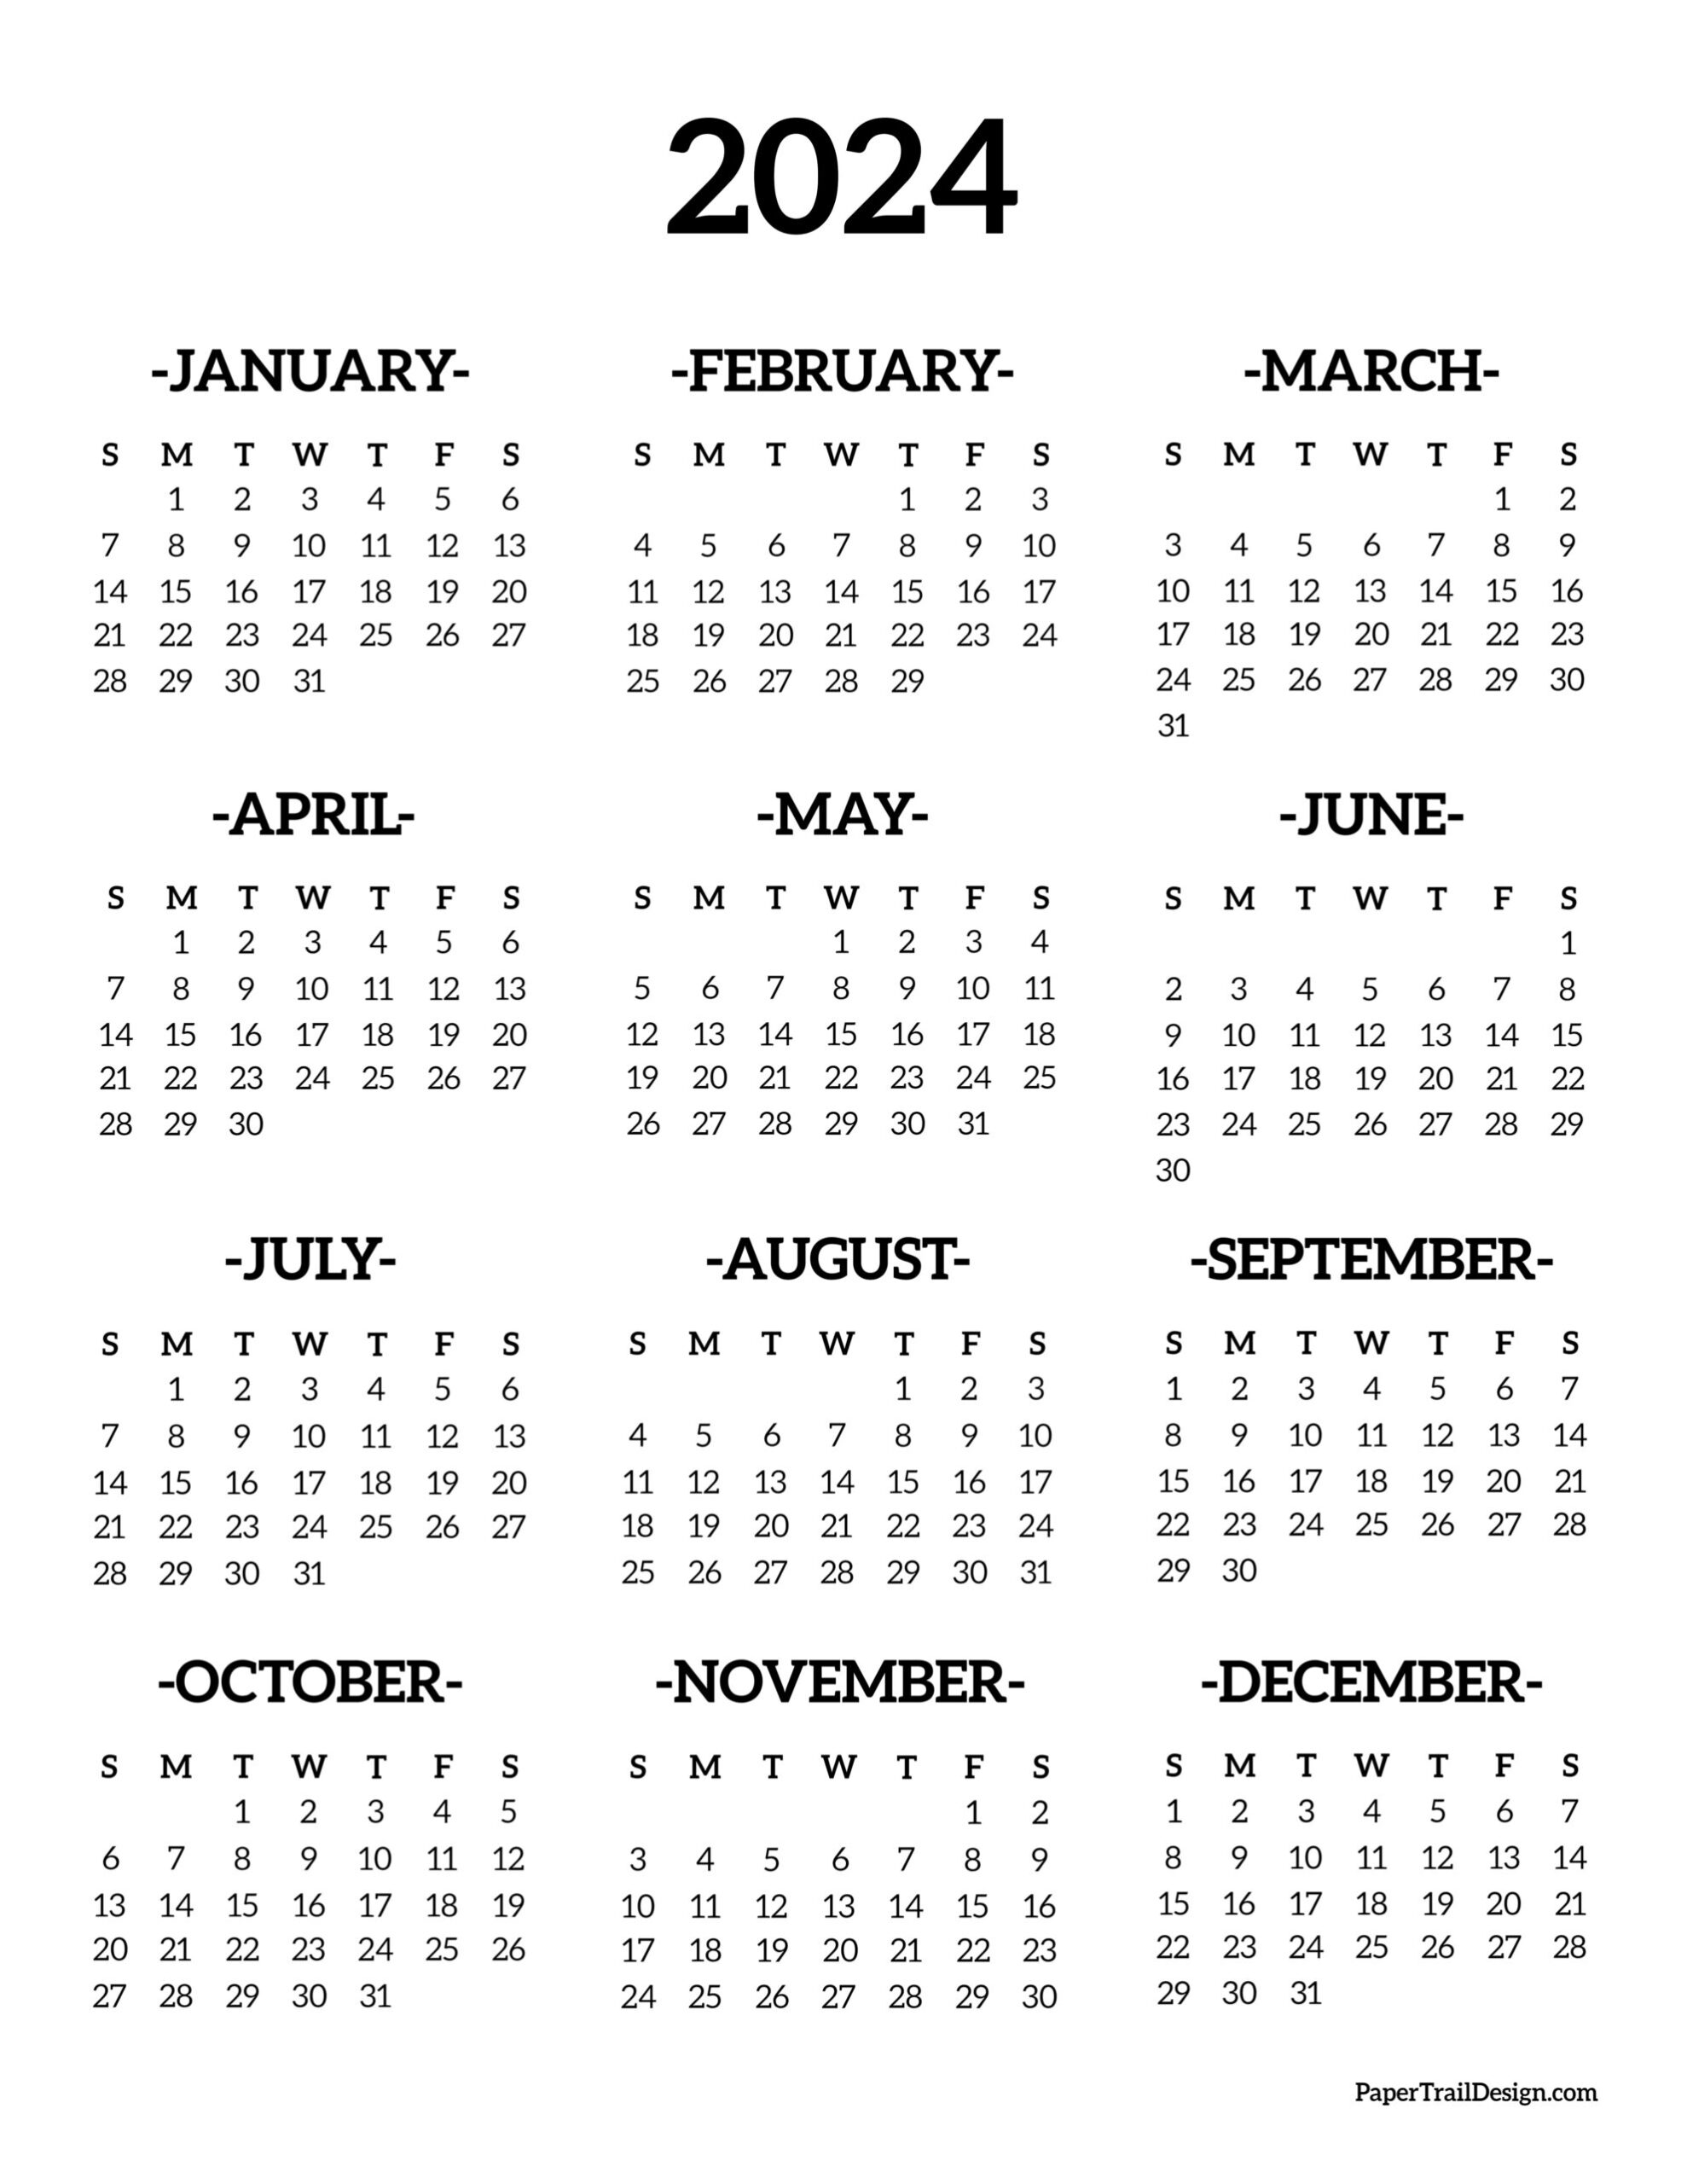 Calendar 2024 Printable One Page - Paper Trail Design for Printable Calendar 2024 Yearly